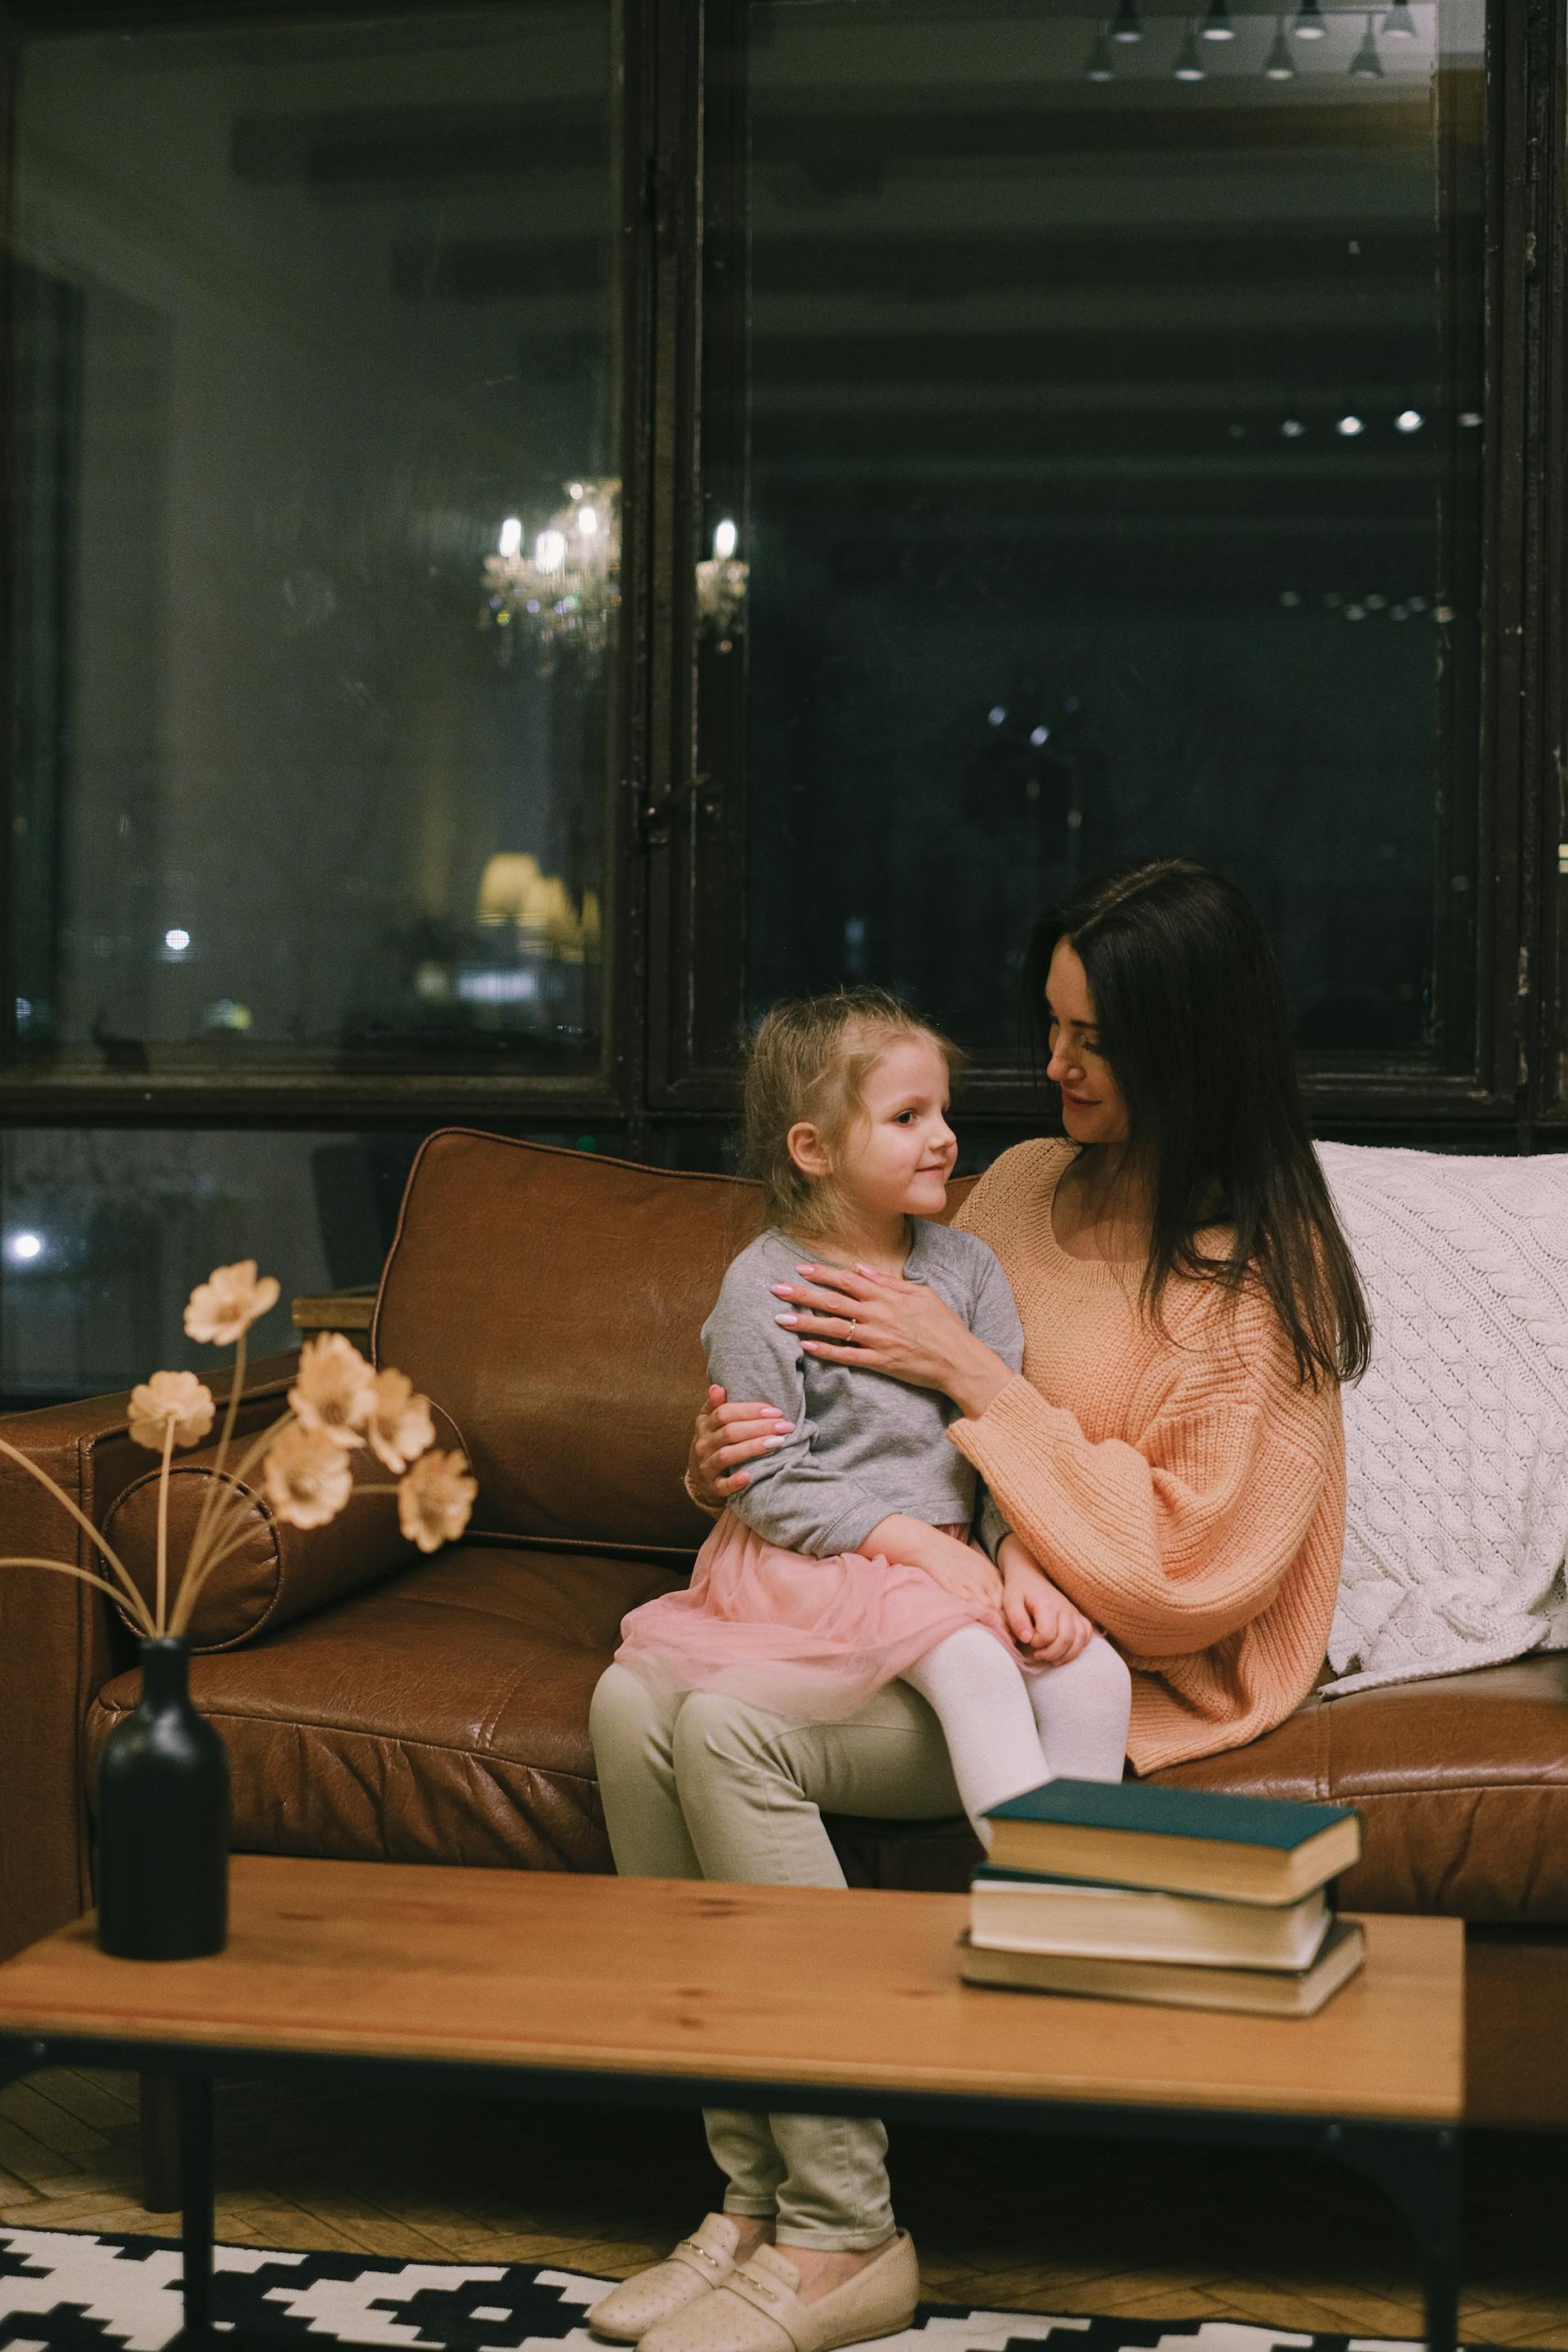 A little girl sitting on her mother's lap | Source: Pexels